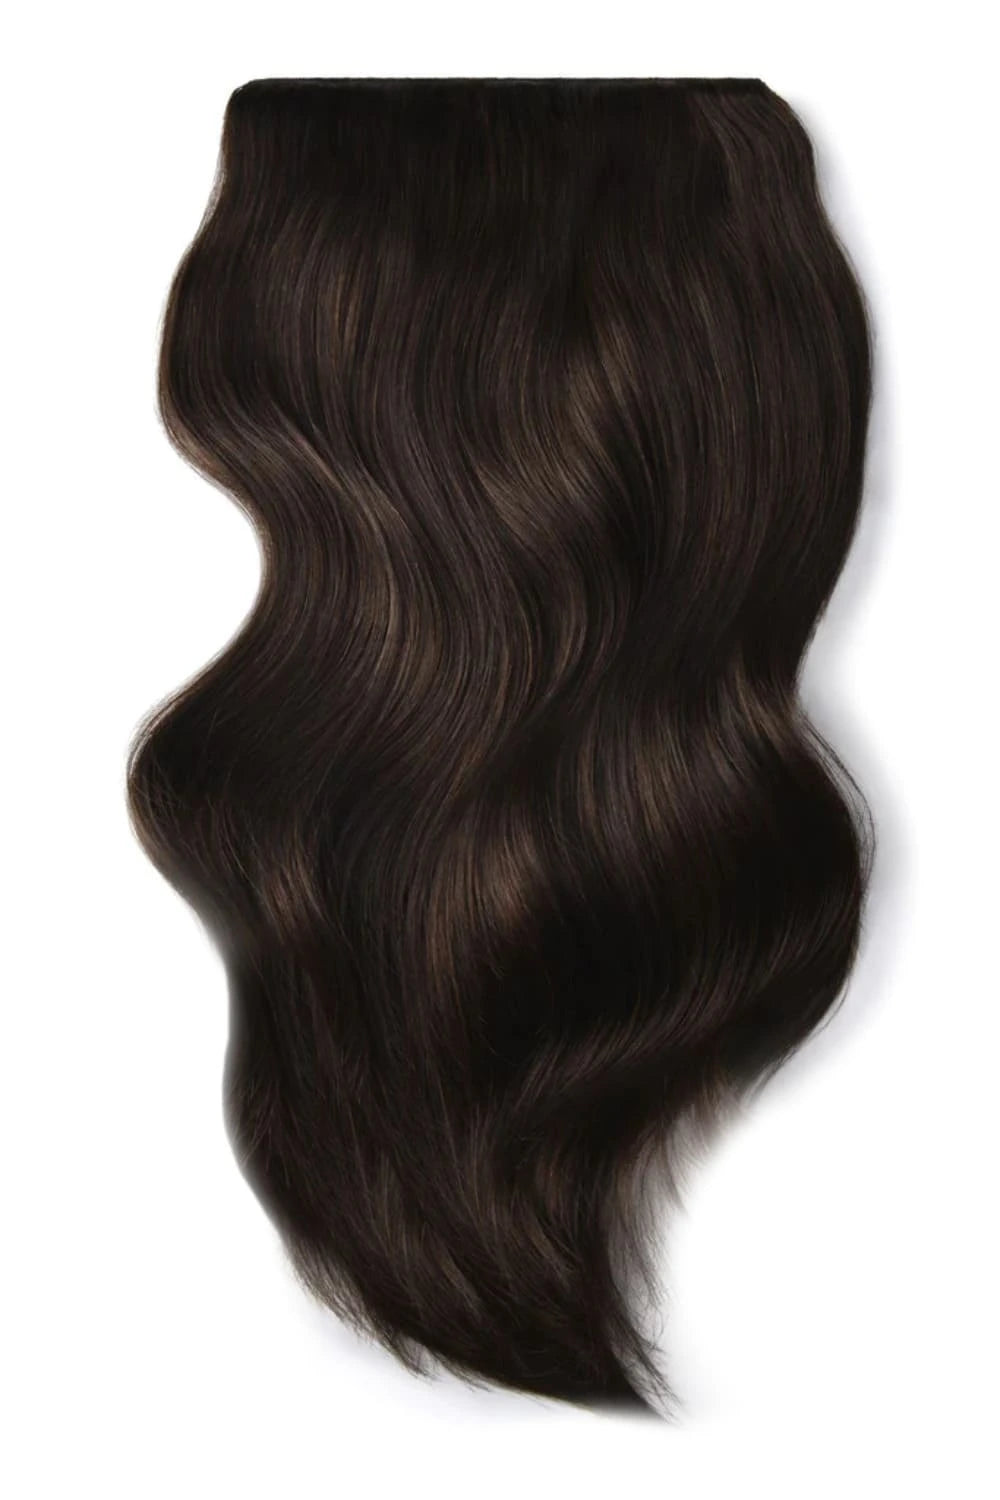 200g (180-220g) Hair Extensions for Thick Hair